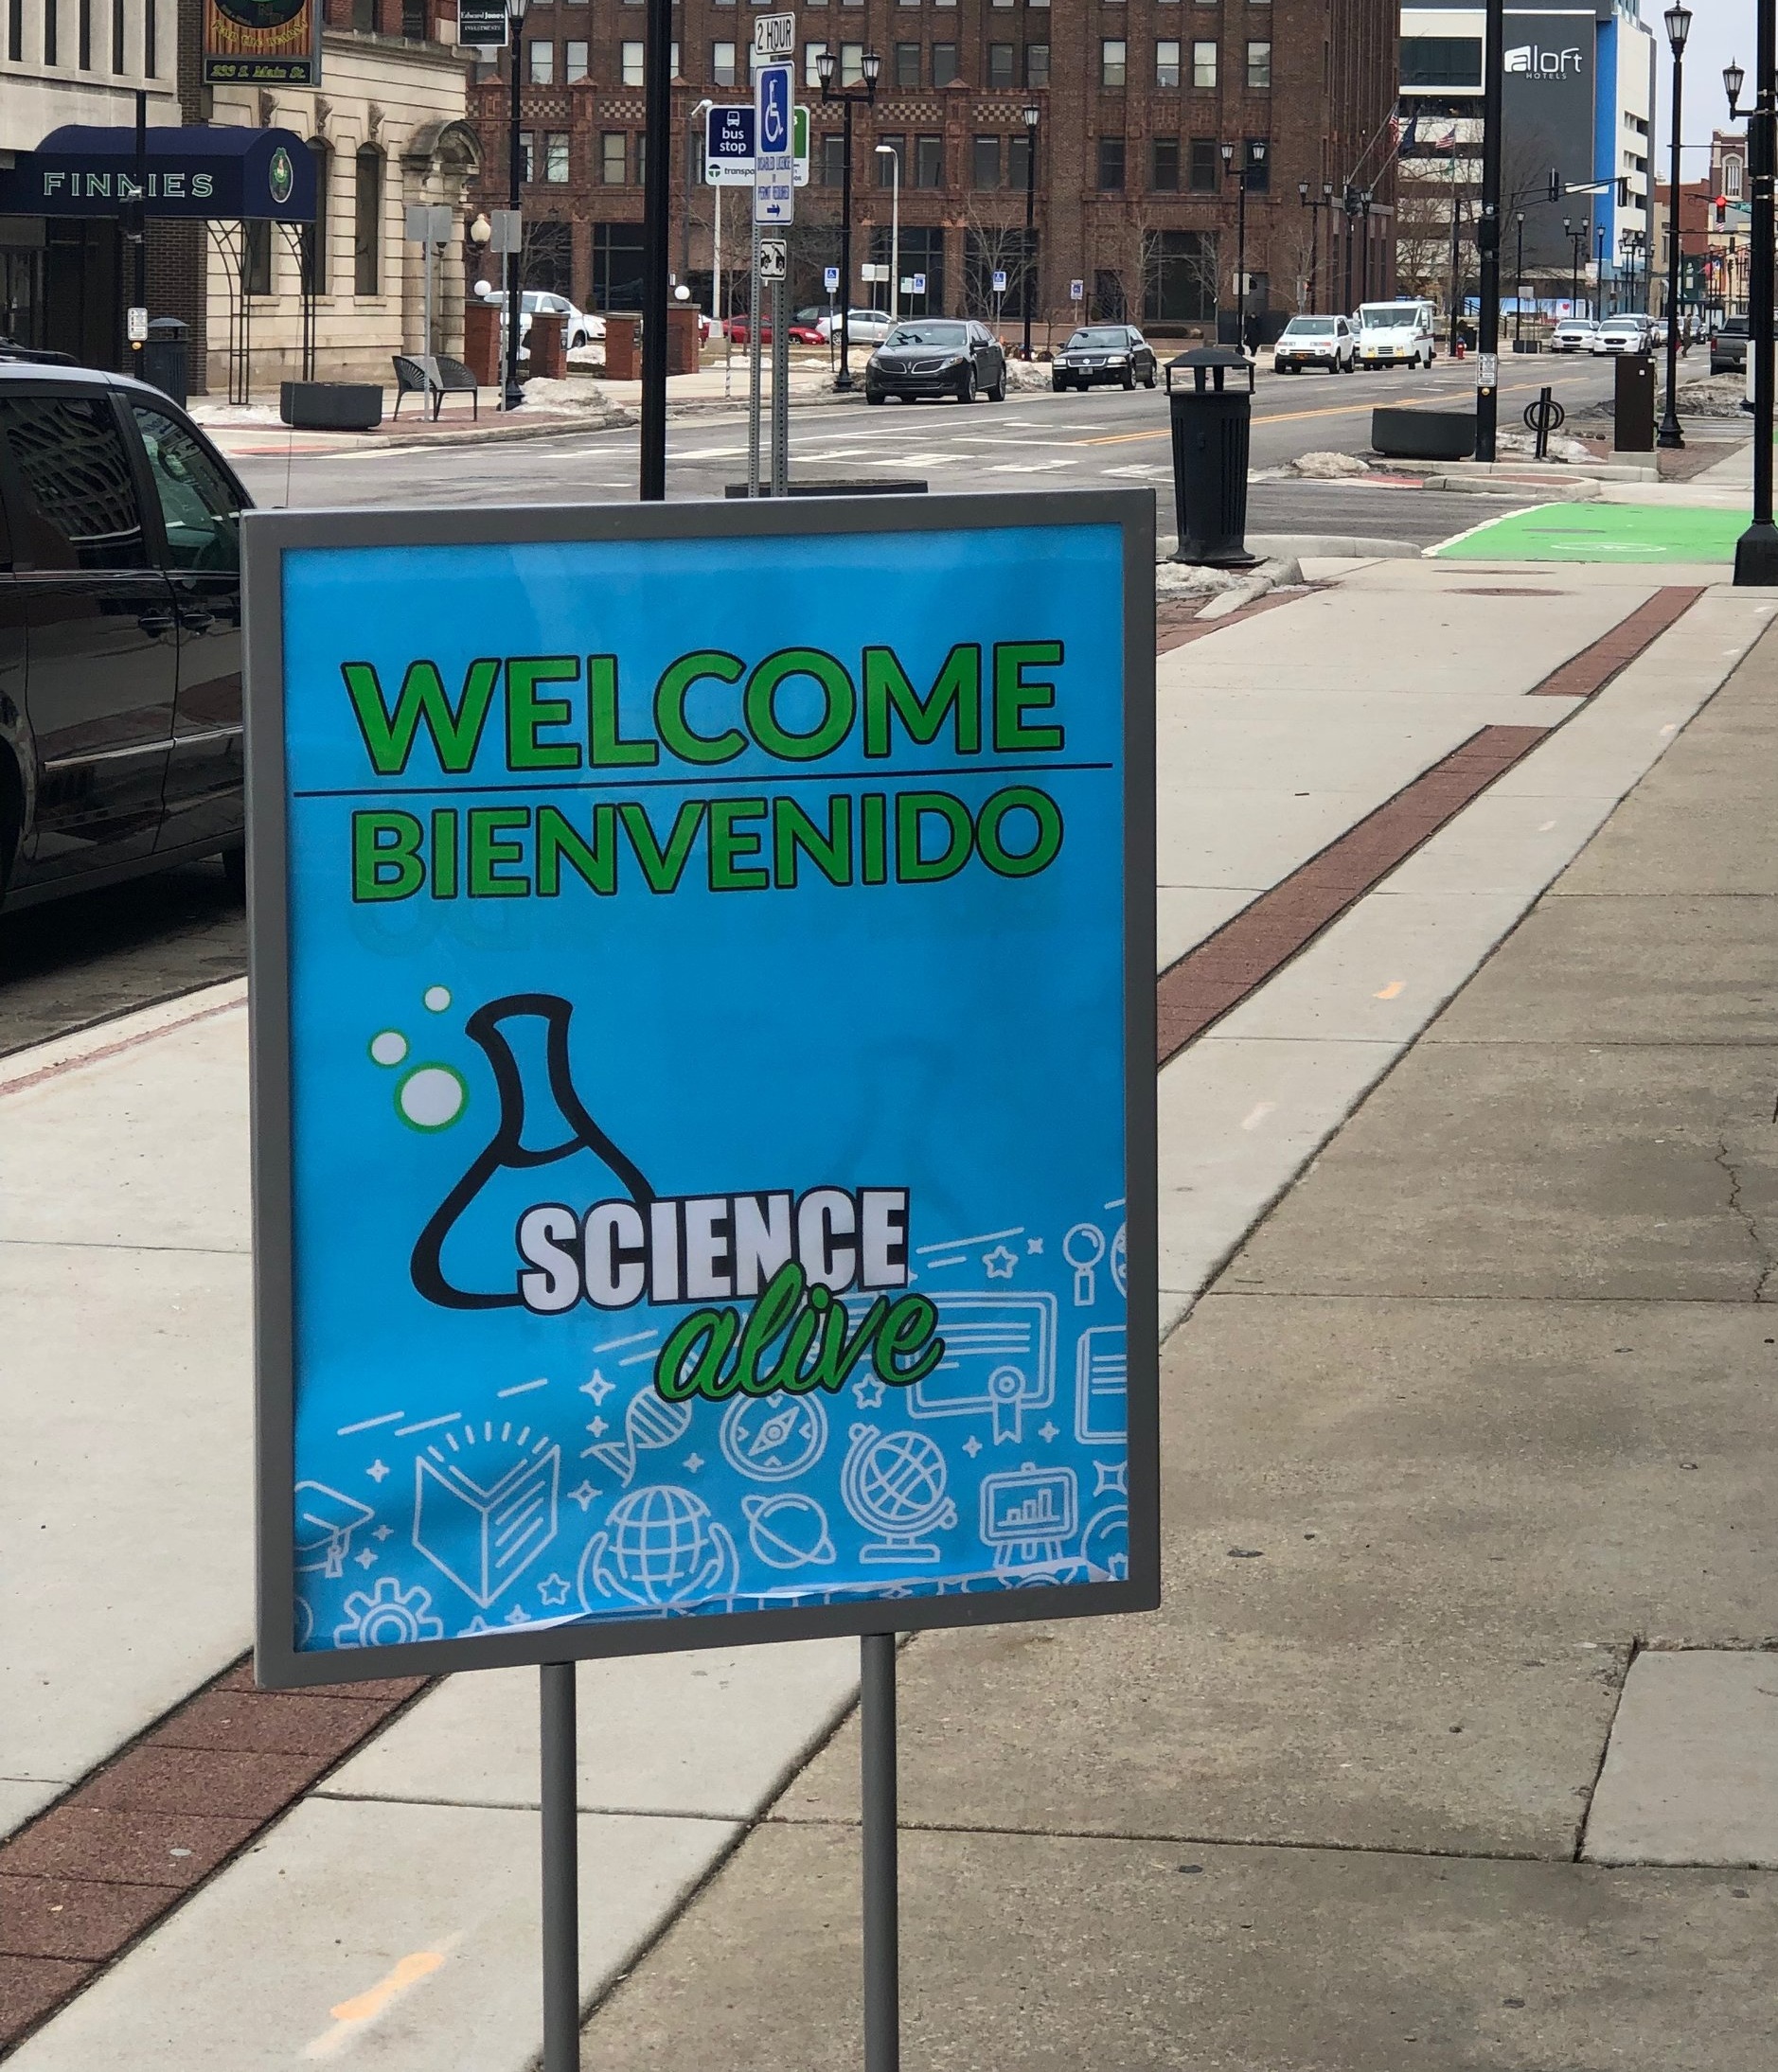 Bienvenido/Welcome sign at the 2019 Science Alive festival. (Photo: Melody Lutz, SJCPL)